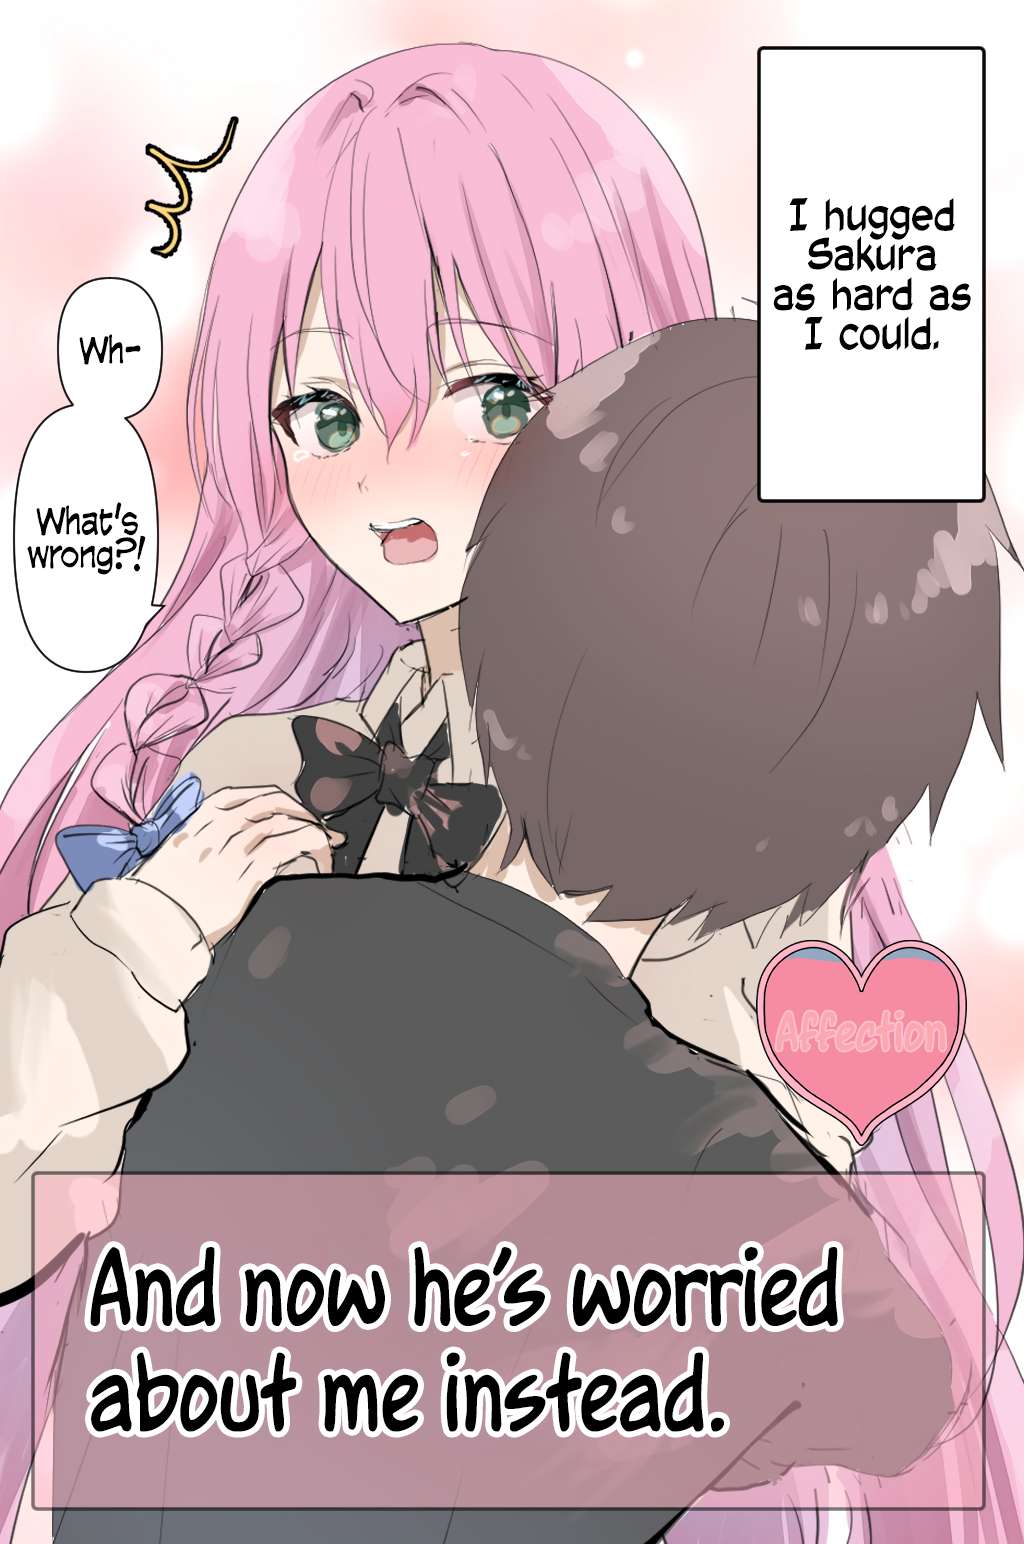 A Femboy Whose Affection Points Go Up Based On Your Choices - chapter 46 - #1